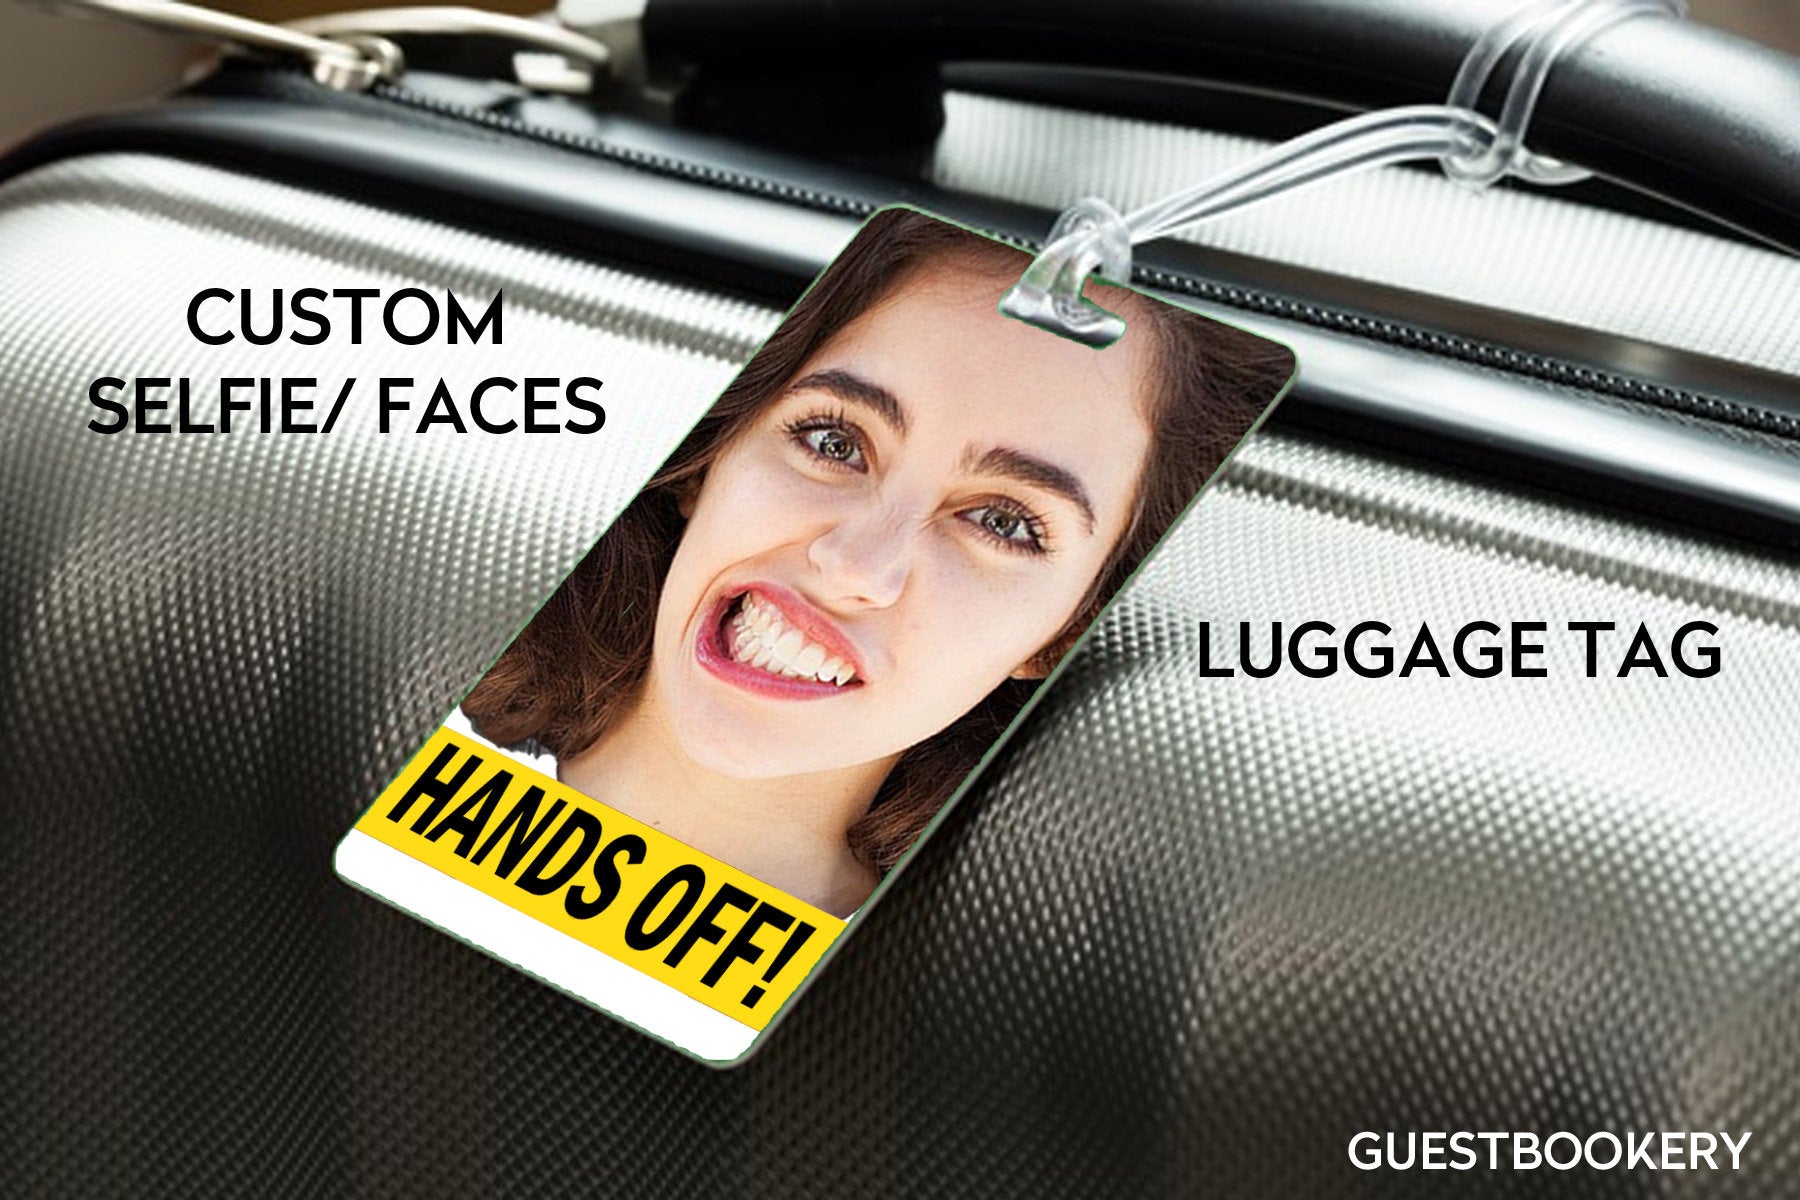 Custom Face Luggage Tag - Hands Off